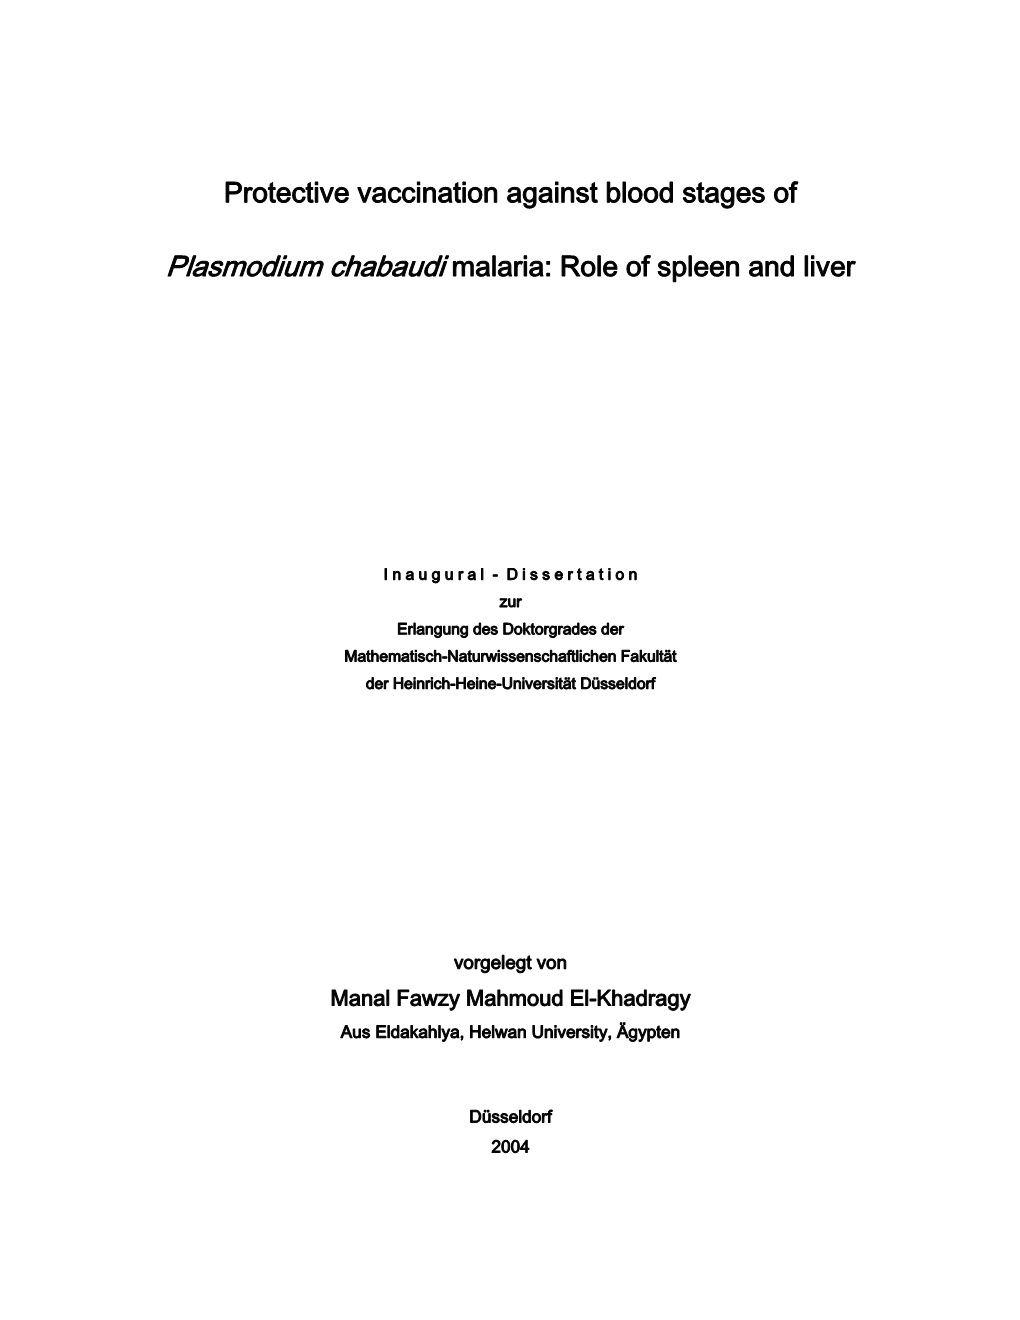 Protective Vaccination Against Blood Stages of Plasmodium